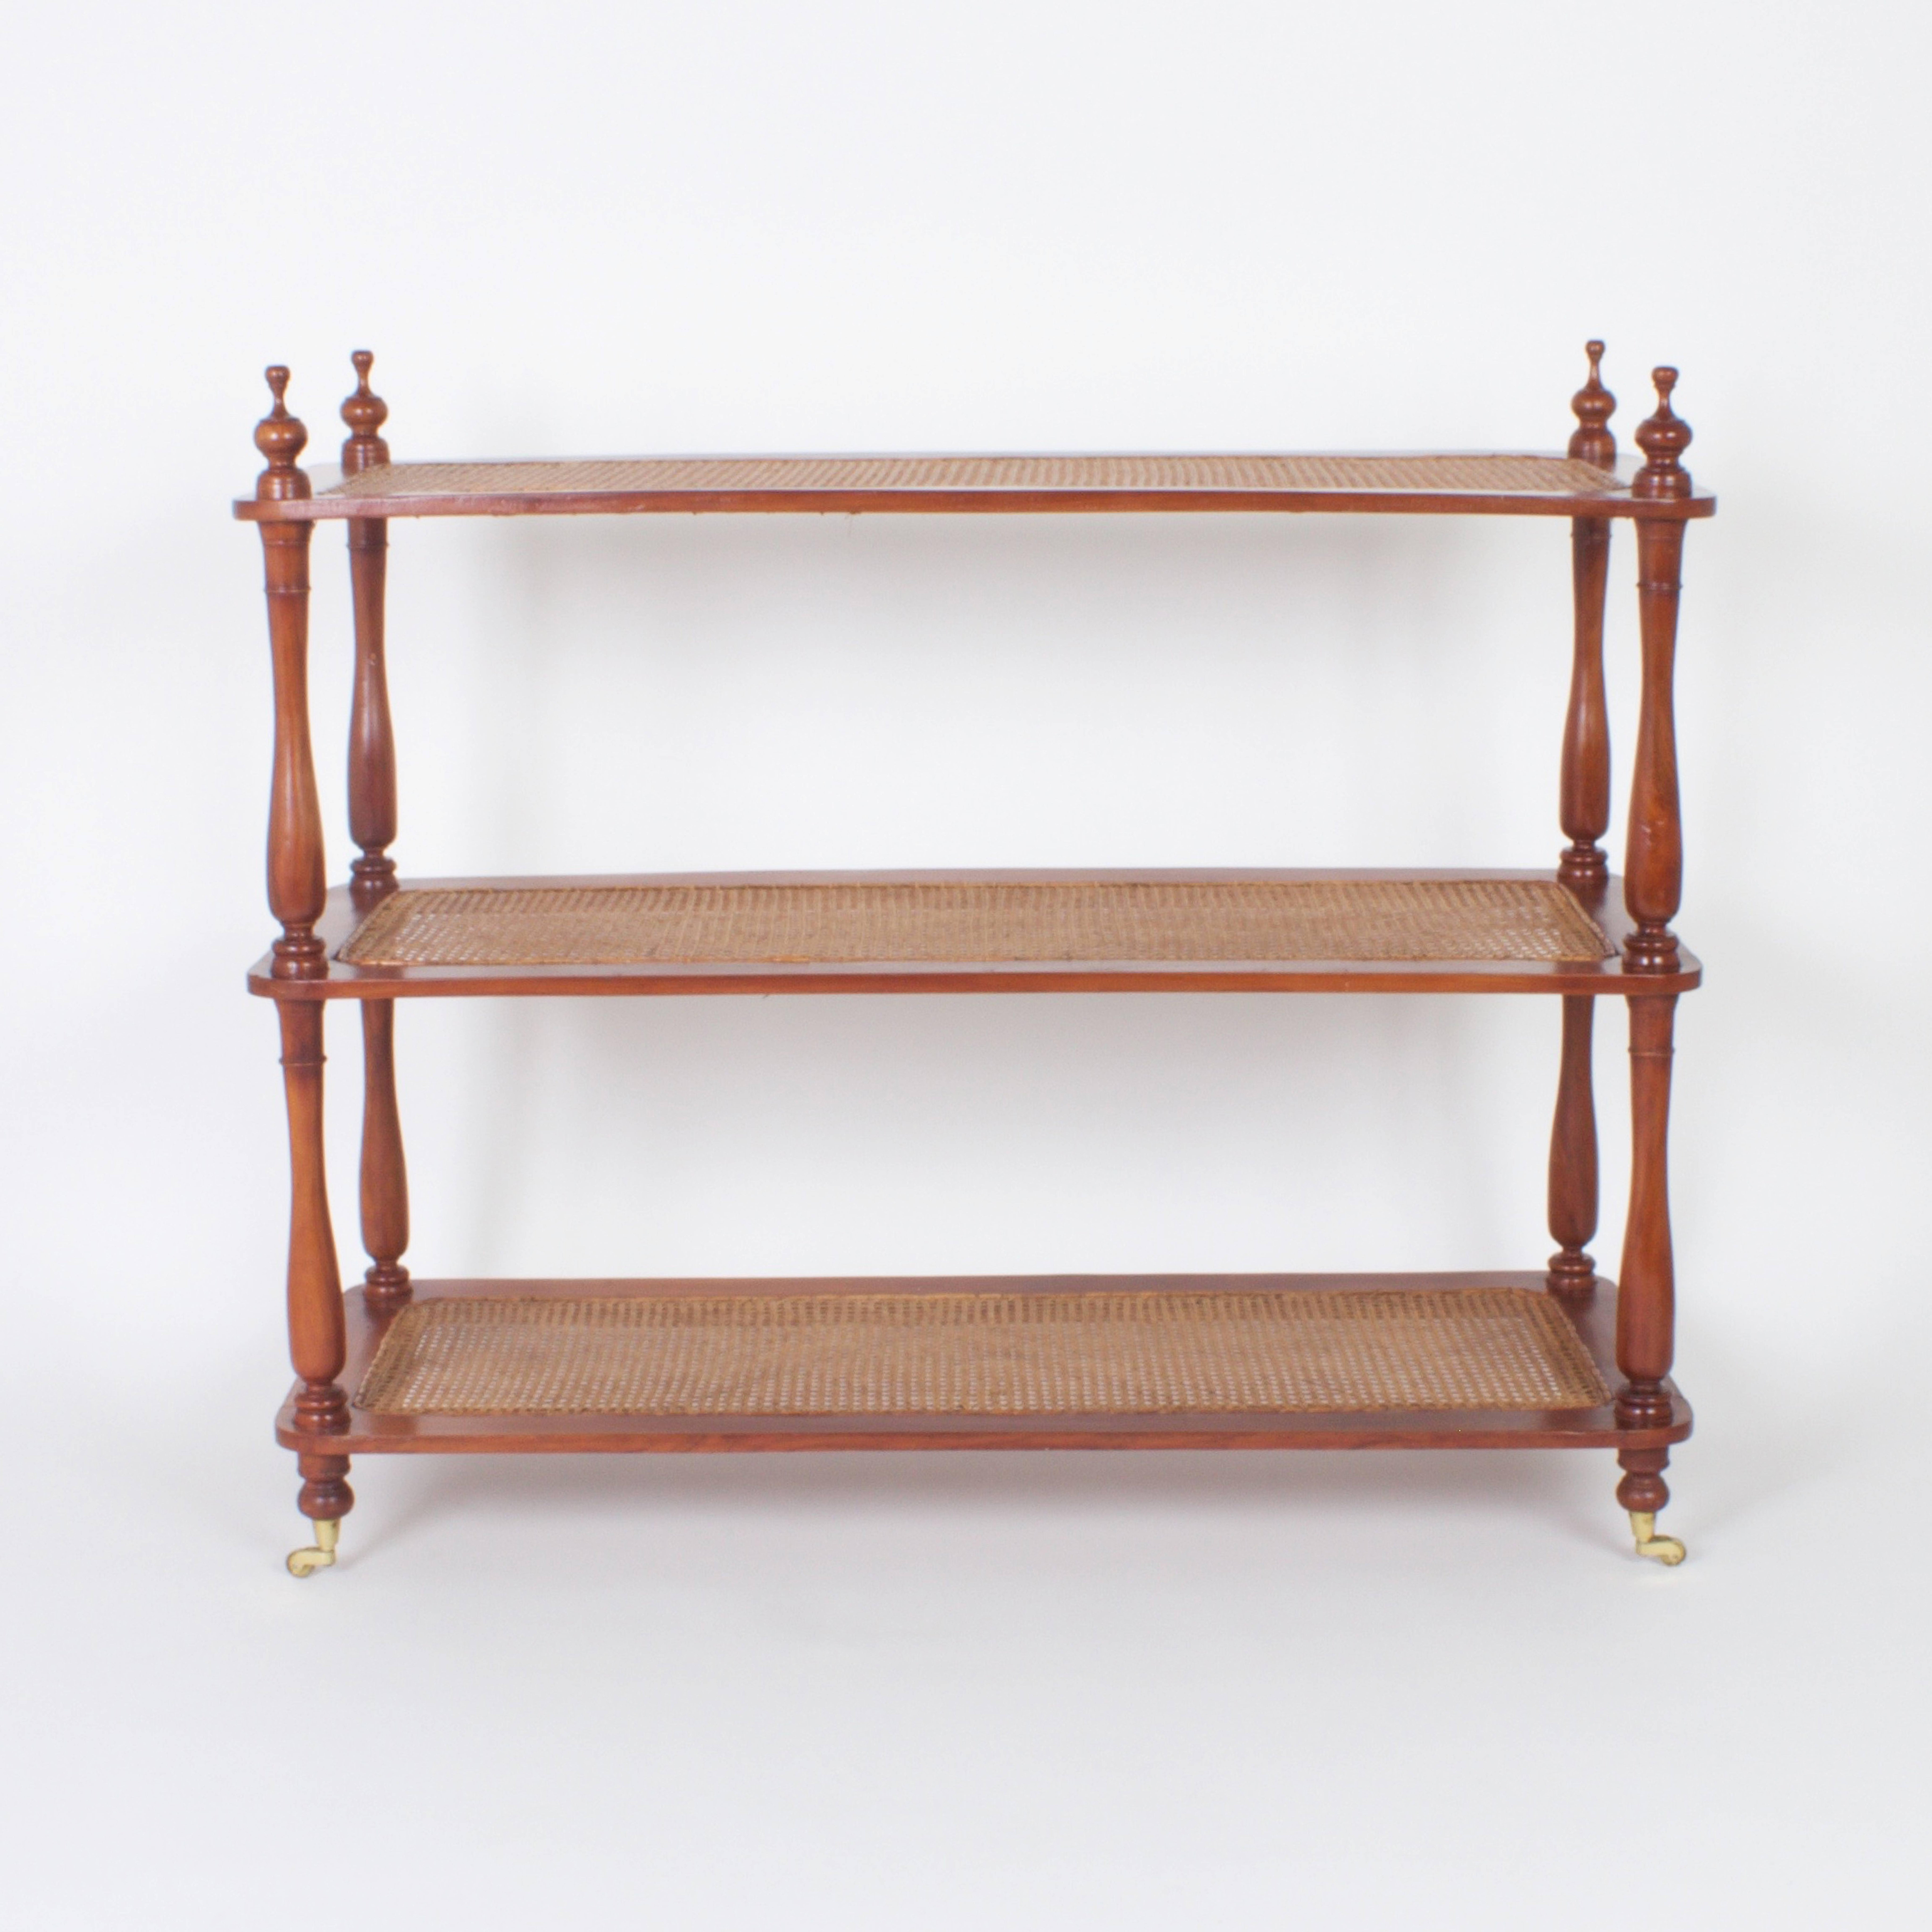 Antique British colonial three-tiered server or etagere crafted in mahogany with hand caned shelves. The supports are turned and topped with finials, all set on tulip feet with brass cup casters. Newly polished. 

